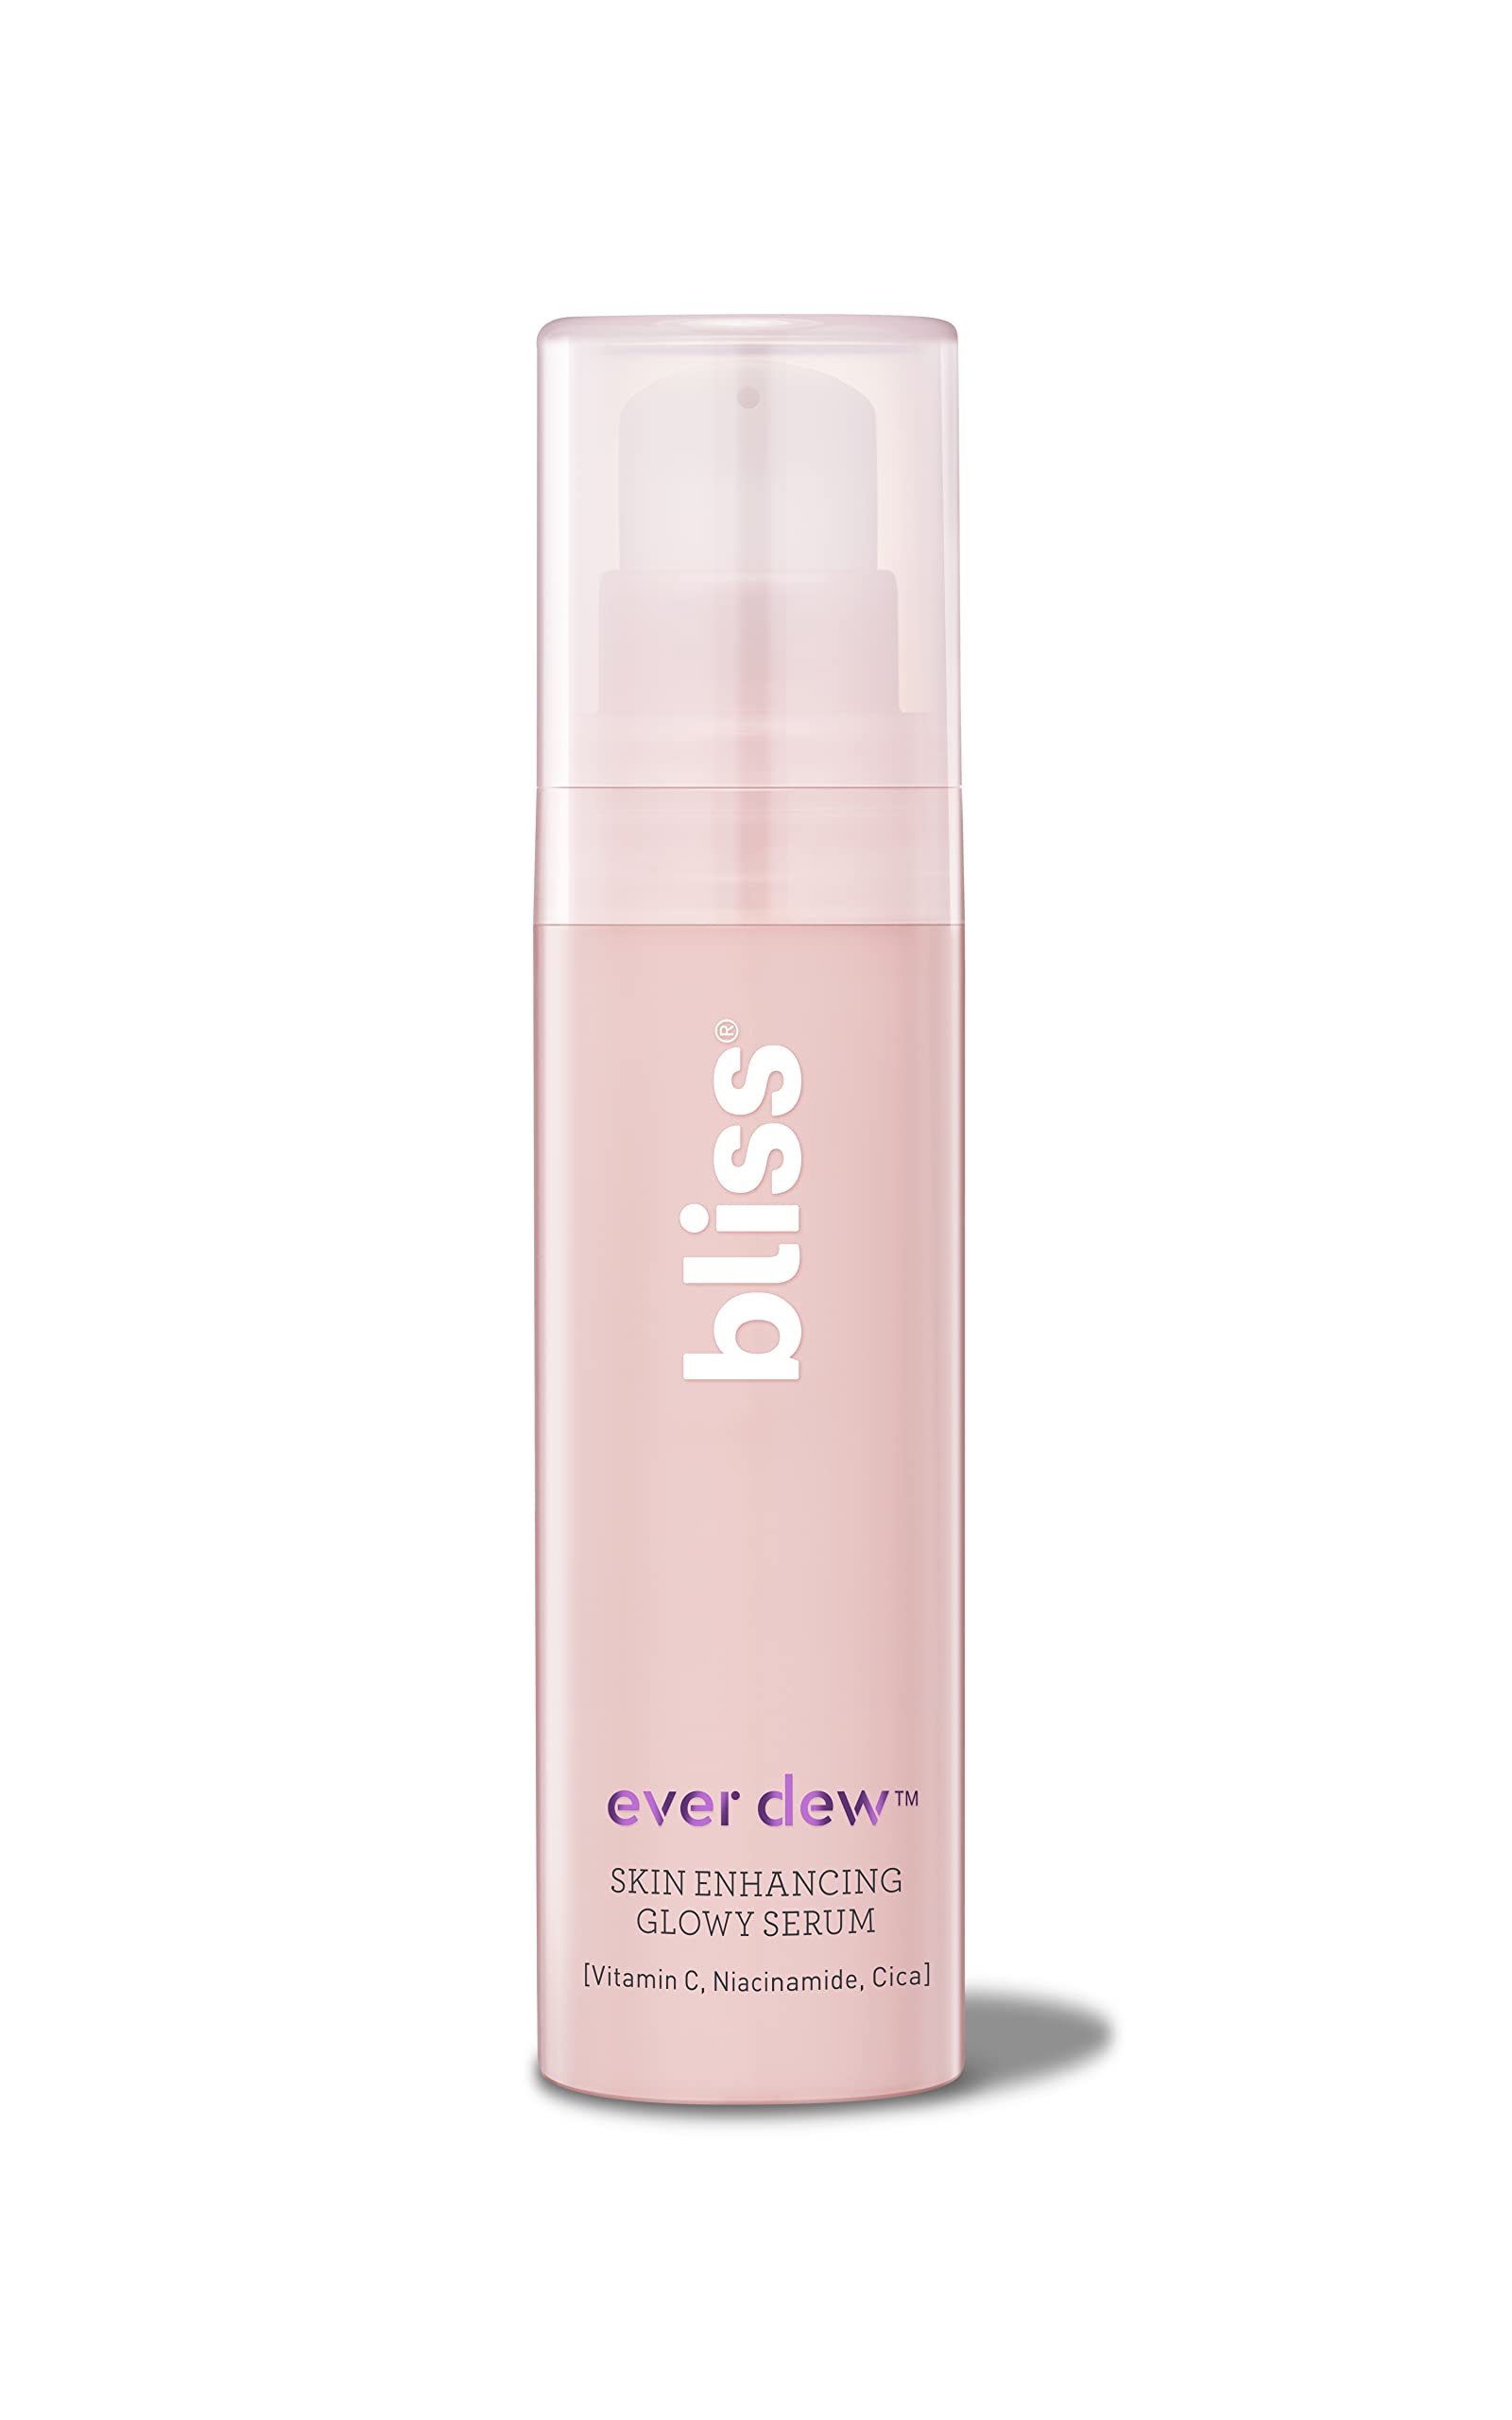 Bliss Ever Dew Skin Enhancing Glowing Serum | Radiance Booster, Primer and Liquid Highlighter